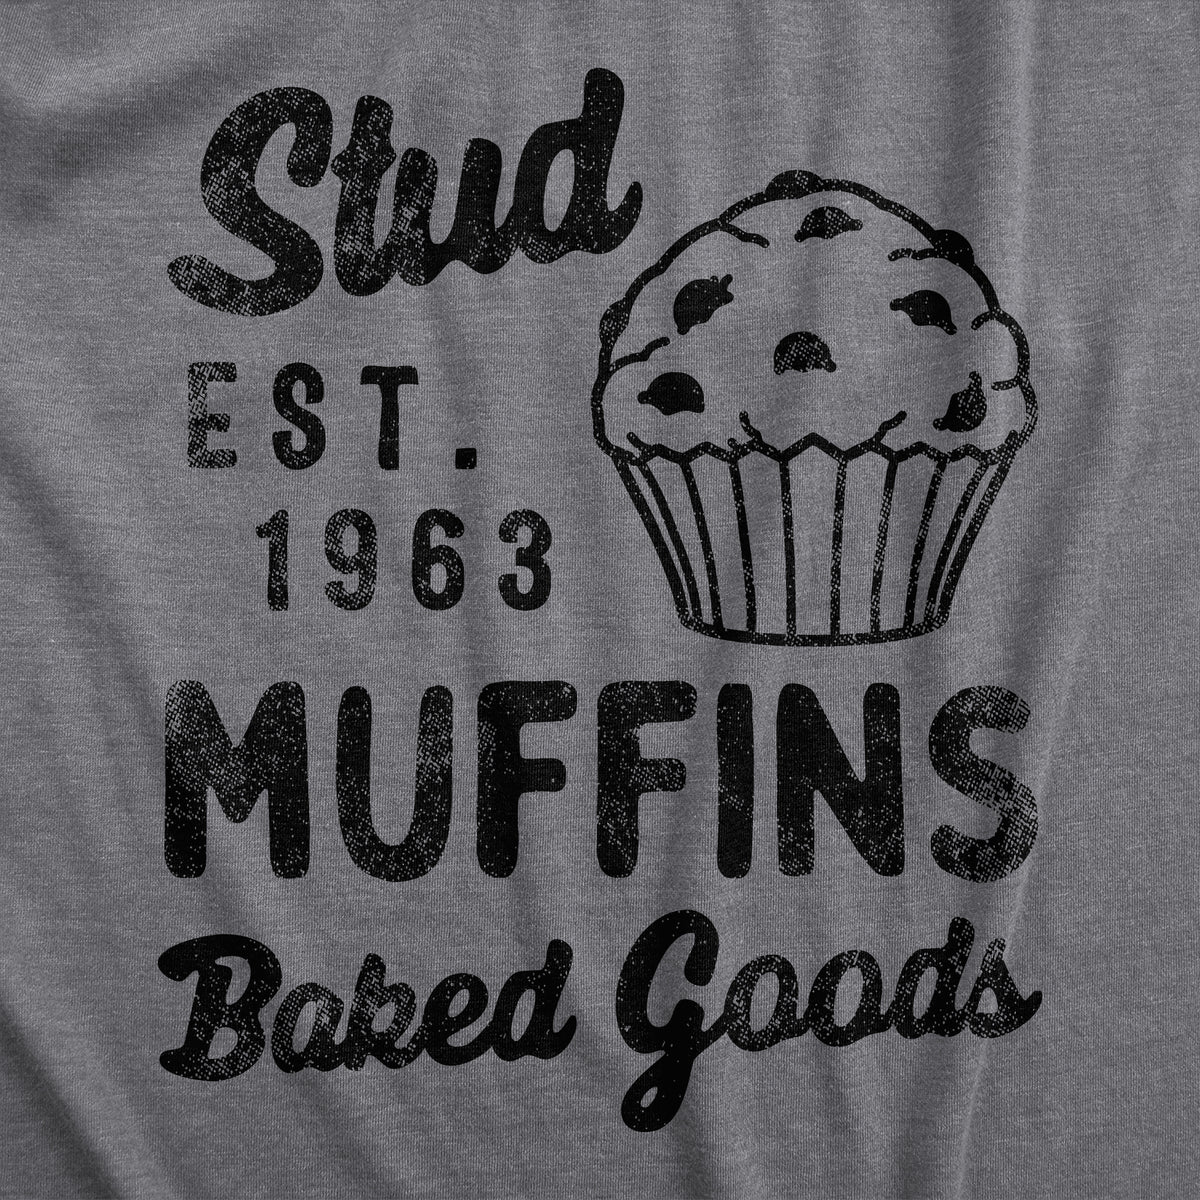 Stud Muffins Baked Goods Youth T Shirt